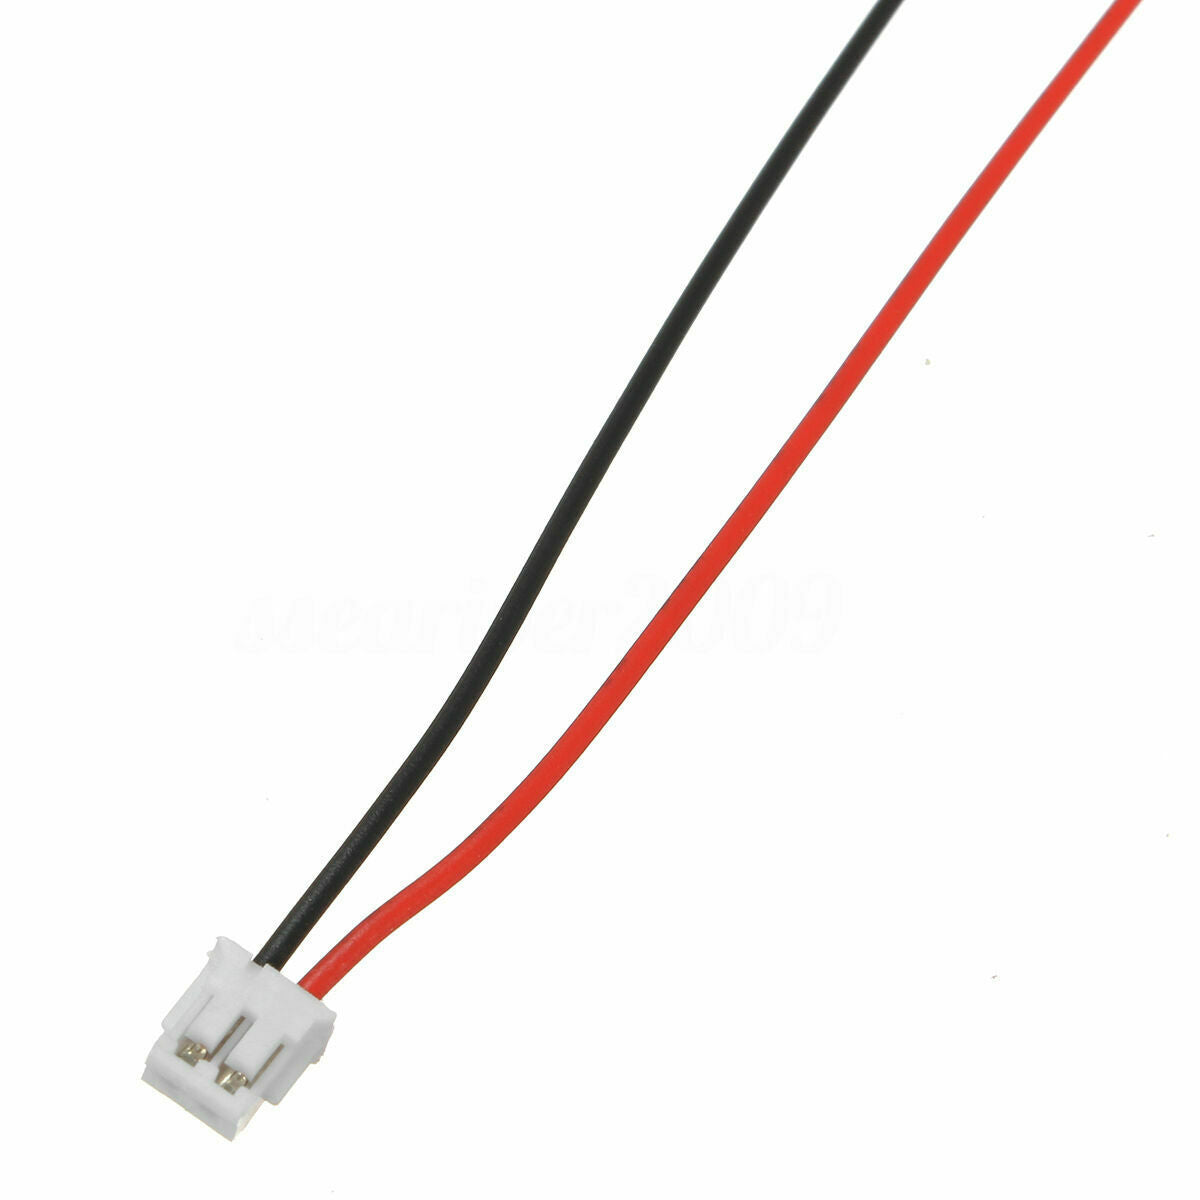 JST ZH 1.5mm 2-Pin 1S Female Connector 10cm wire & Male Header (10 sets)